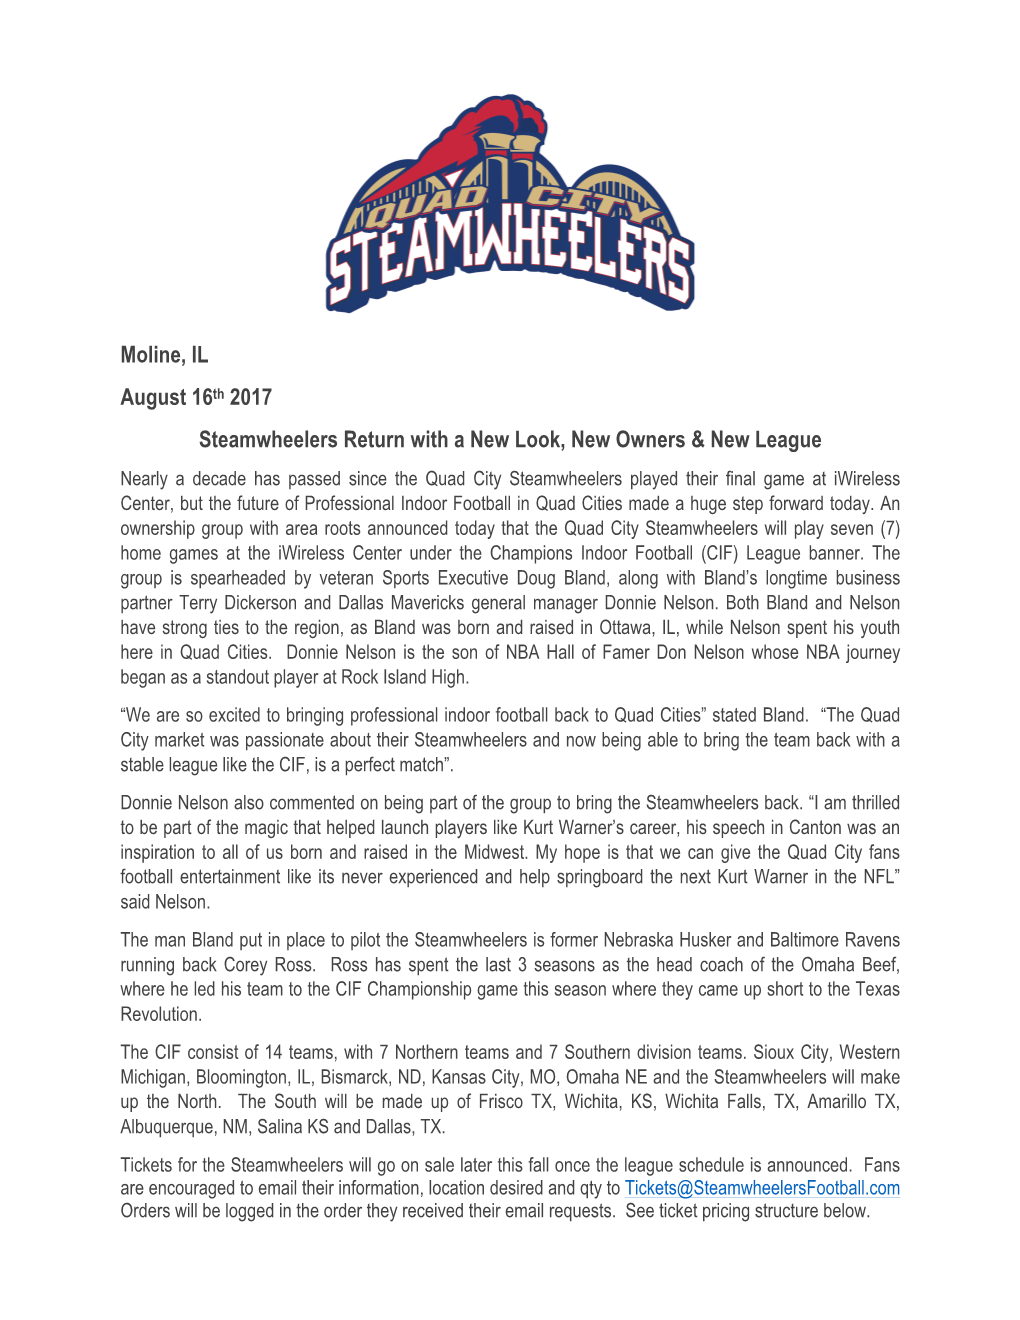 Moline, IL August 16Th 2017 Steamwheelers Return with a New